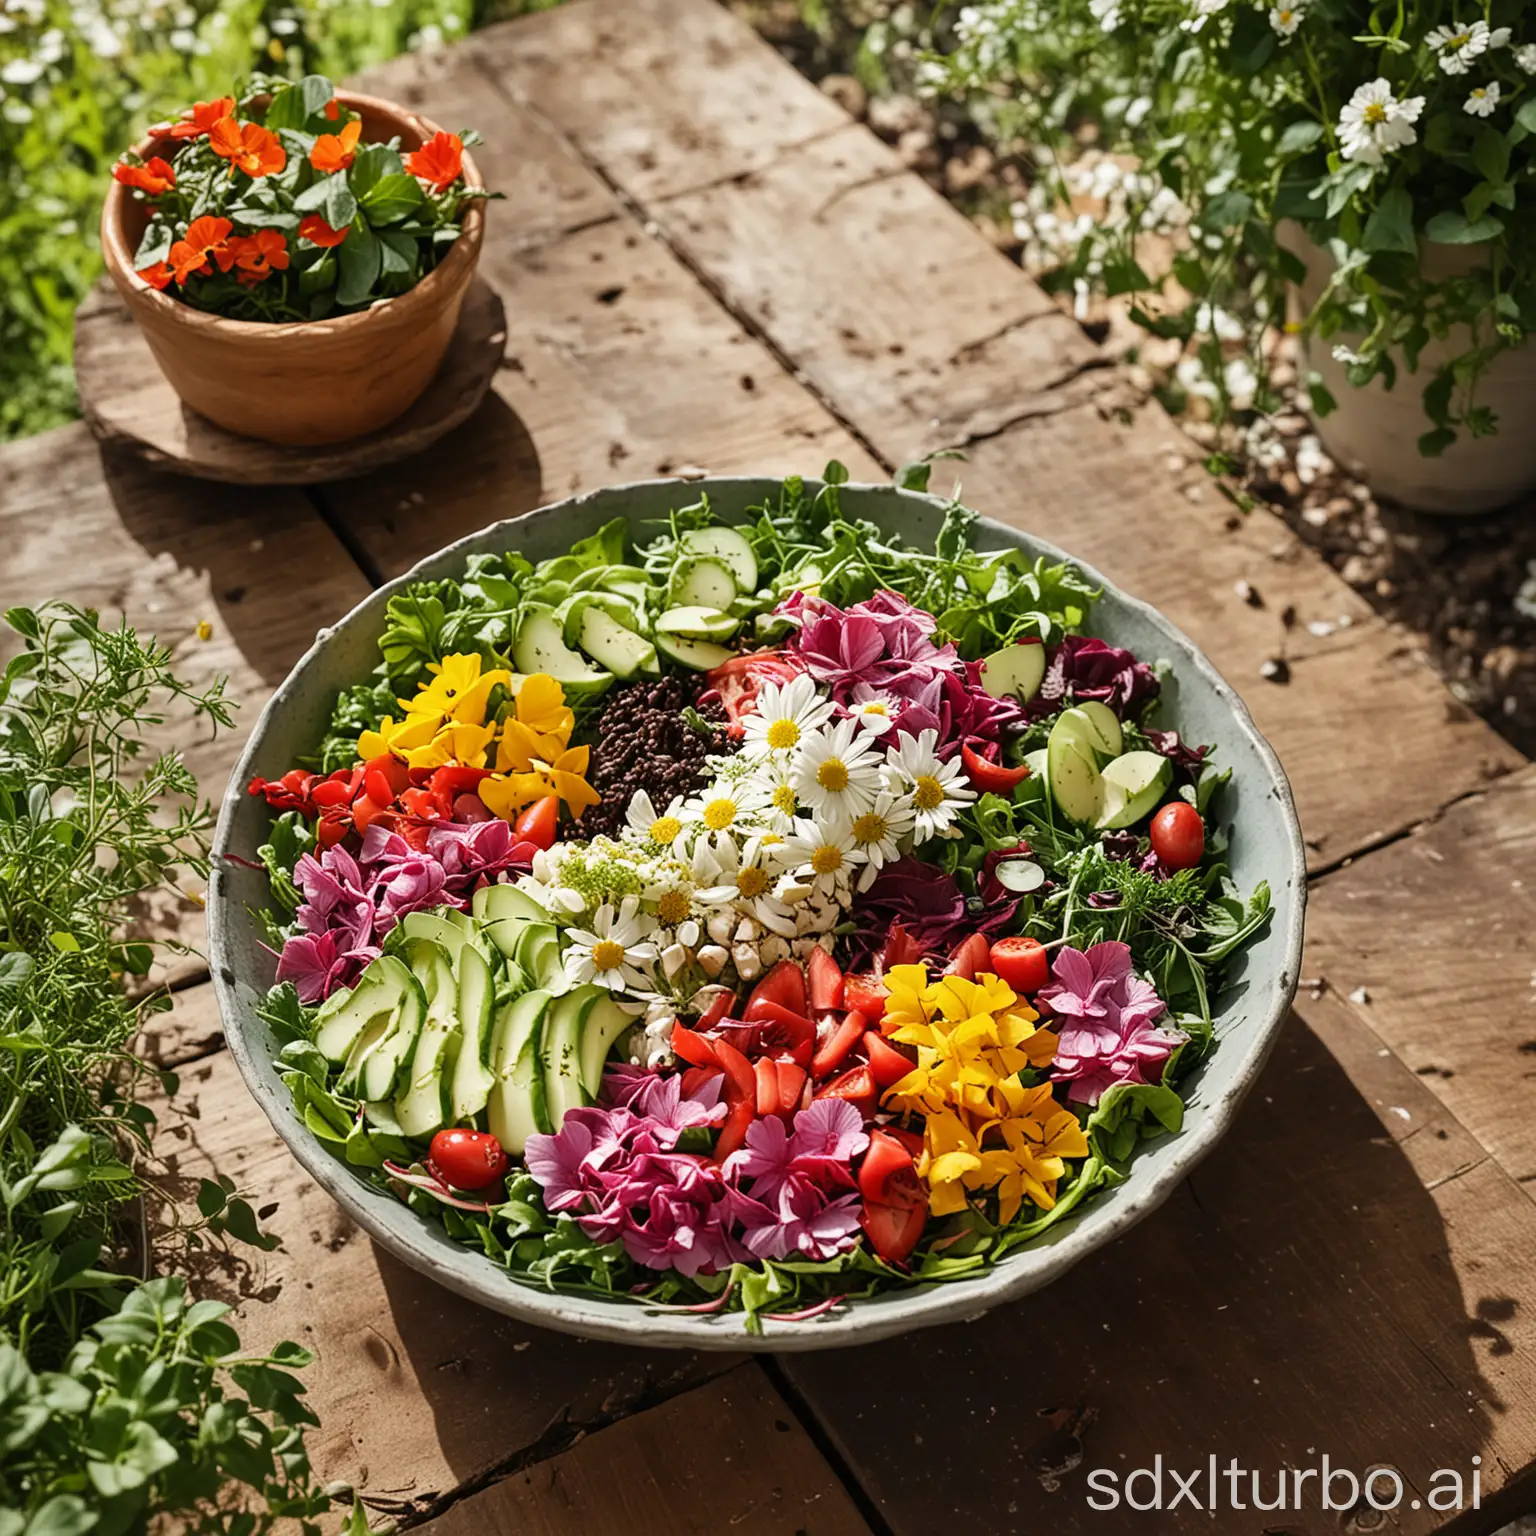 A fresh advertisement still for a vibrant salad, displayed in a stylish bowl on a rustic wooden outdoor dining table. The background features a lush garden setting with blooming flowers, potted herbs, and a gentle breeze, creating a natural and inviting atmosphere that emphasizes health and freshness in an outdoor dining experience.